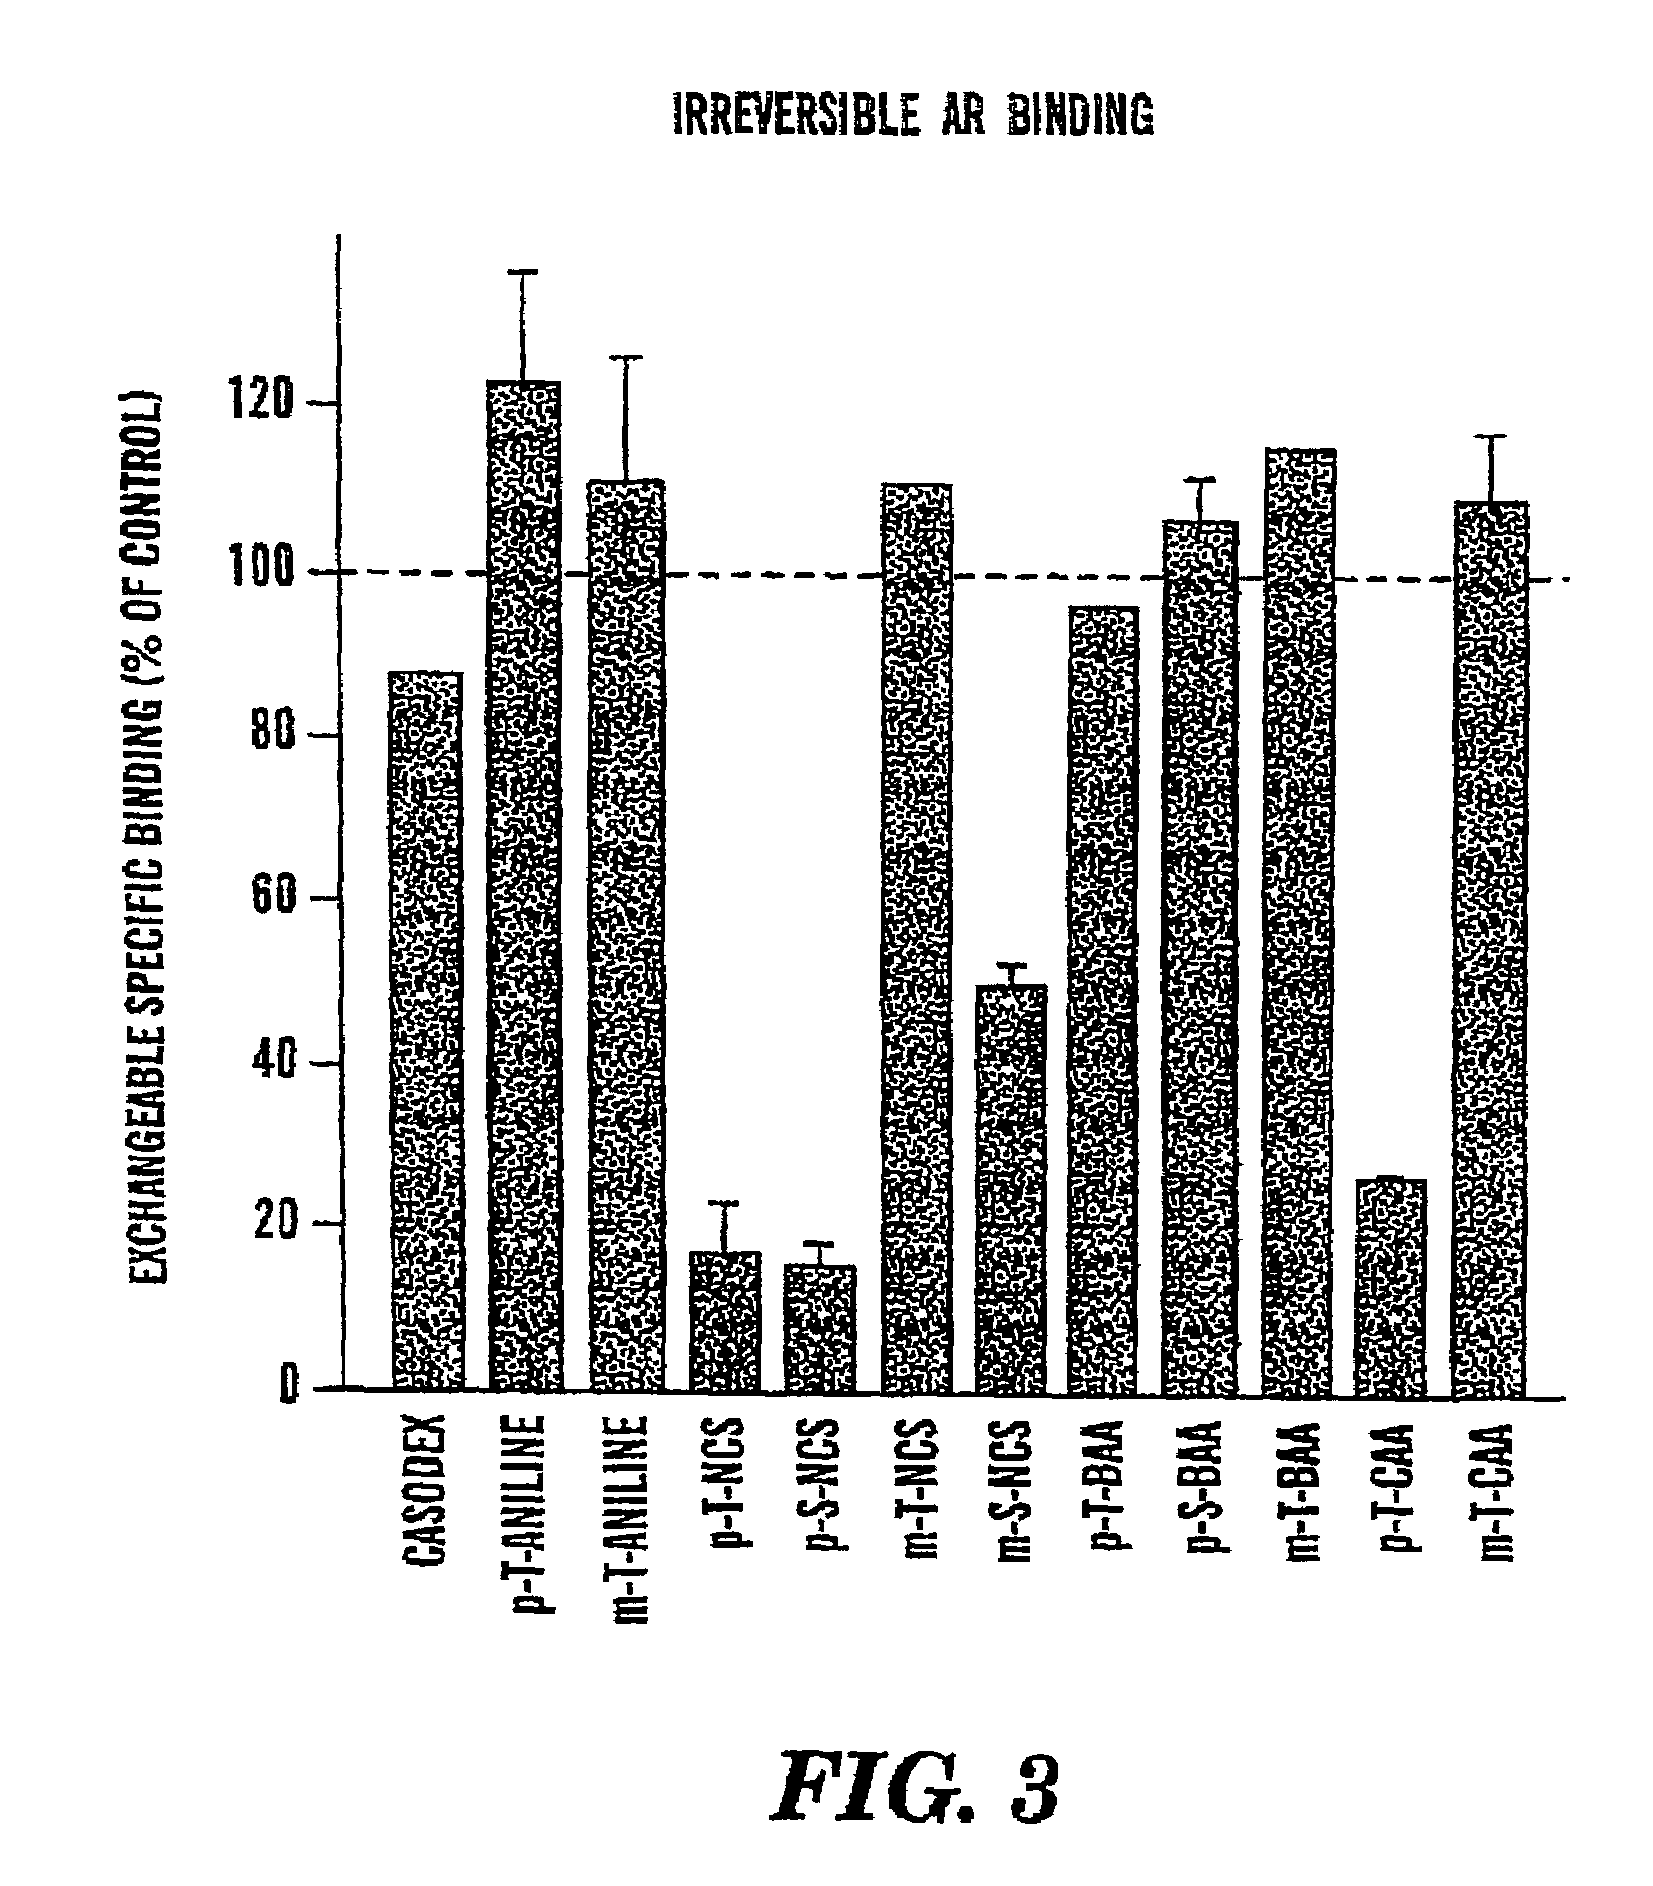 Irreversible non-steroidal antagonist compound and its use in the treatment of prostate cancer